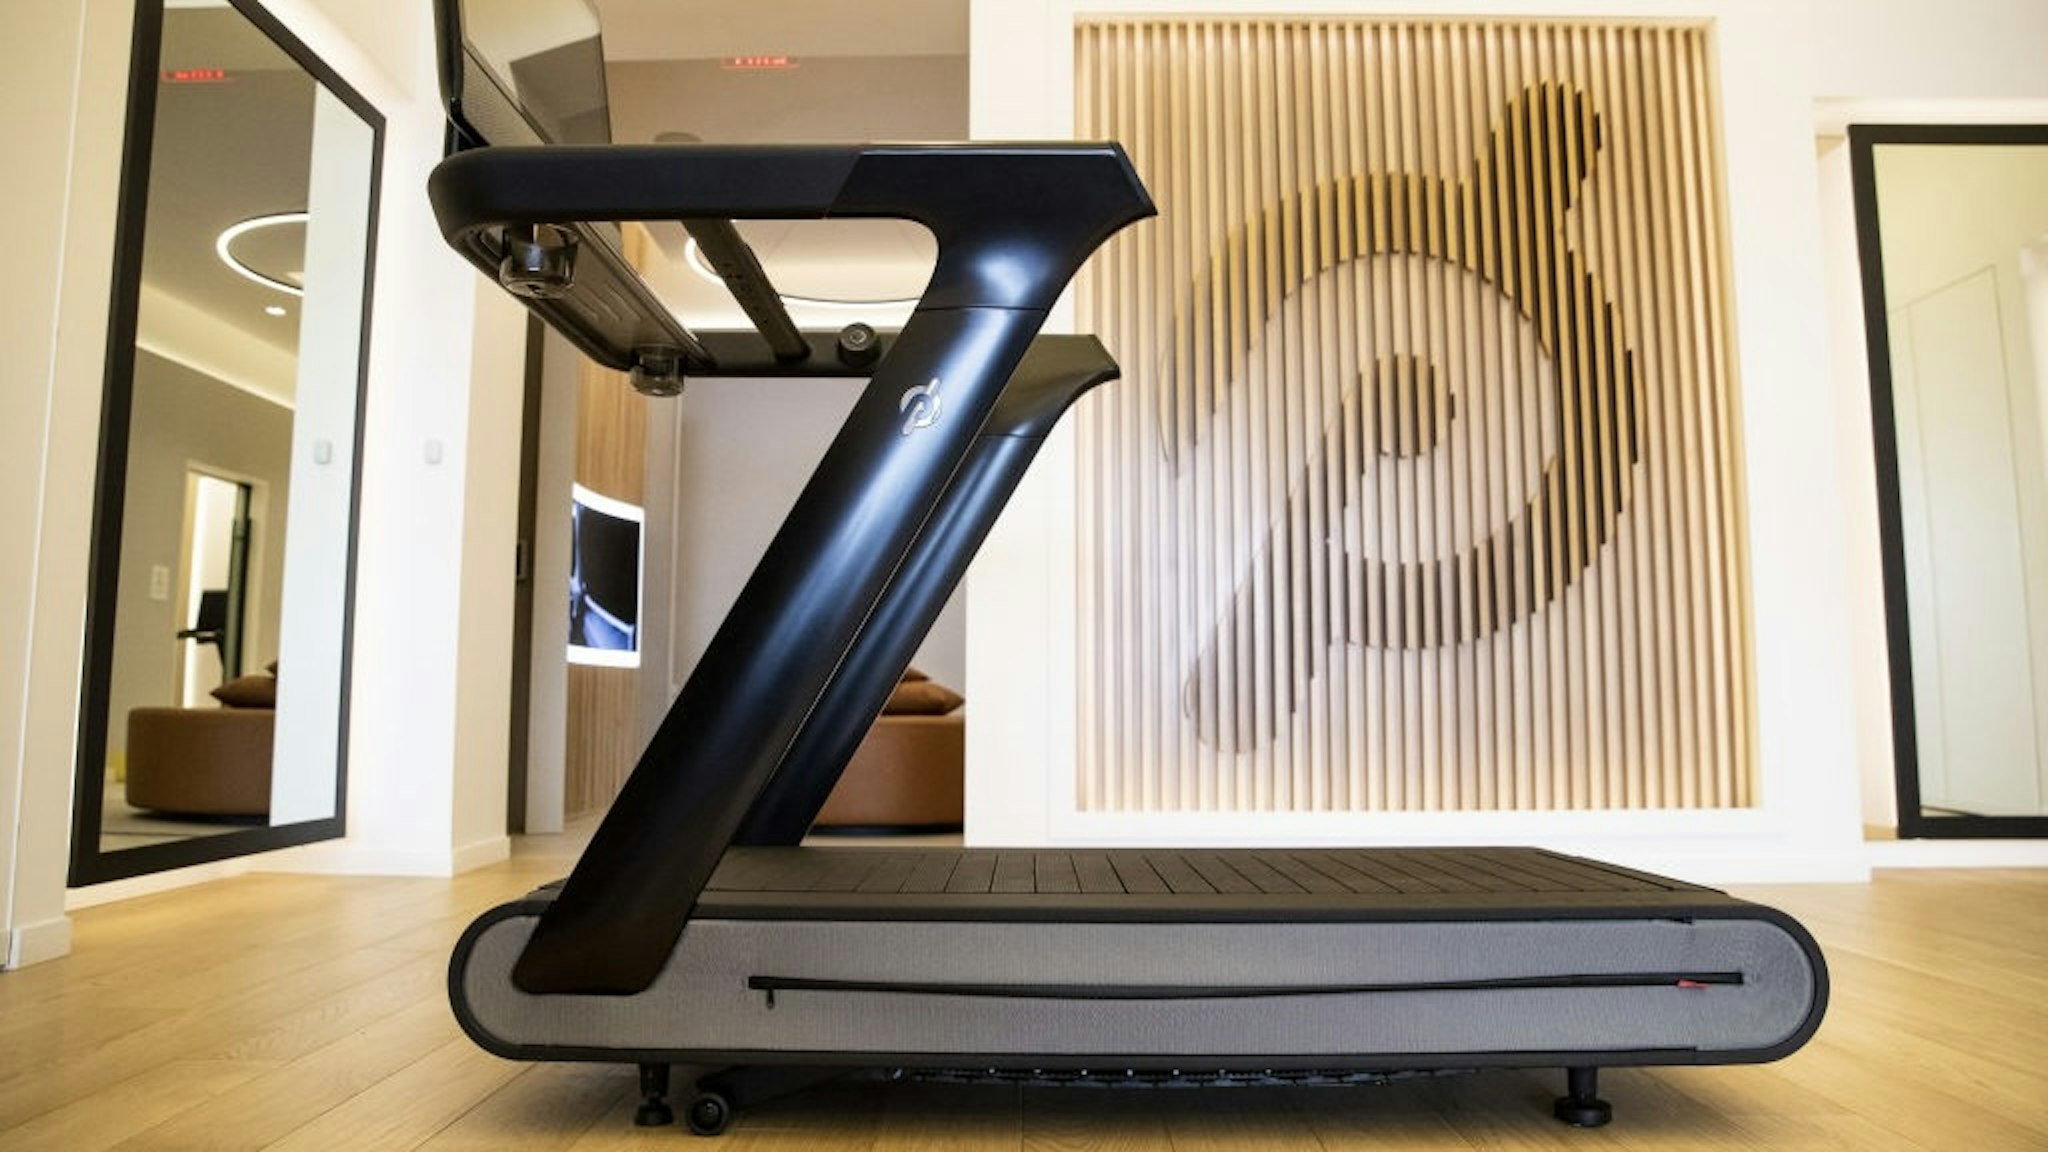 A Peloton Interactive Inc. Tread exercise machine for sale at the company's showroom in Dedham, Massachusetts, U.S., on Wednesday, Feb. 3, 2021. Peloton Interactive Inc. is scheduled to release earnings figures on February 4. Photographer: Adam Glanzman/Bloomberg